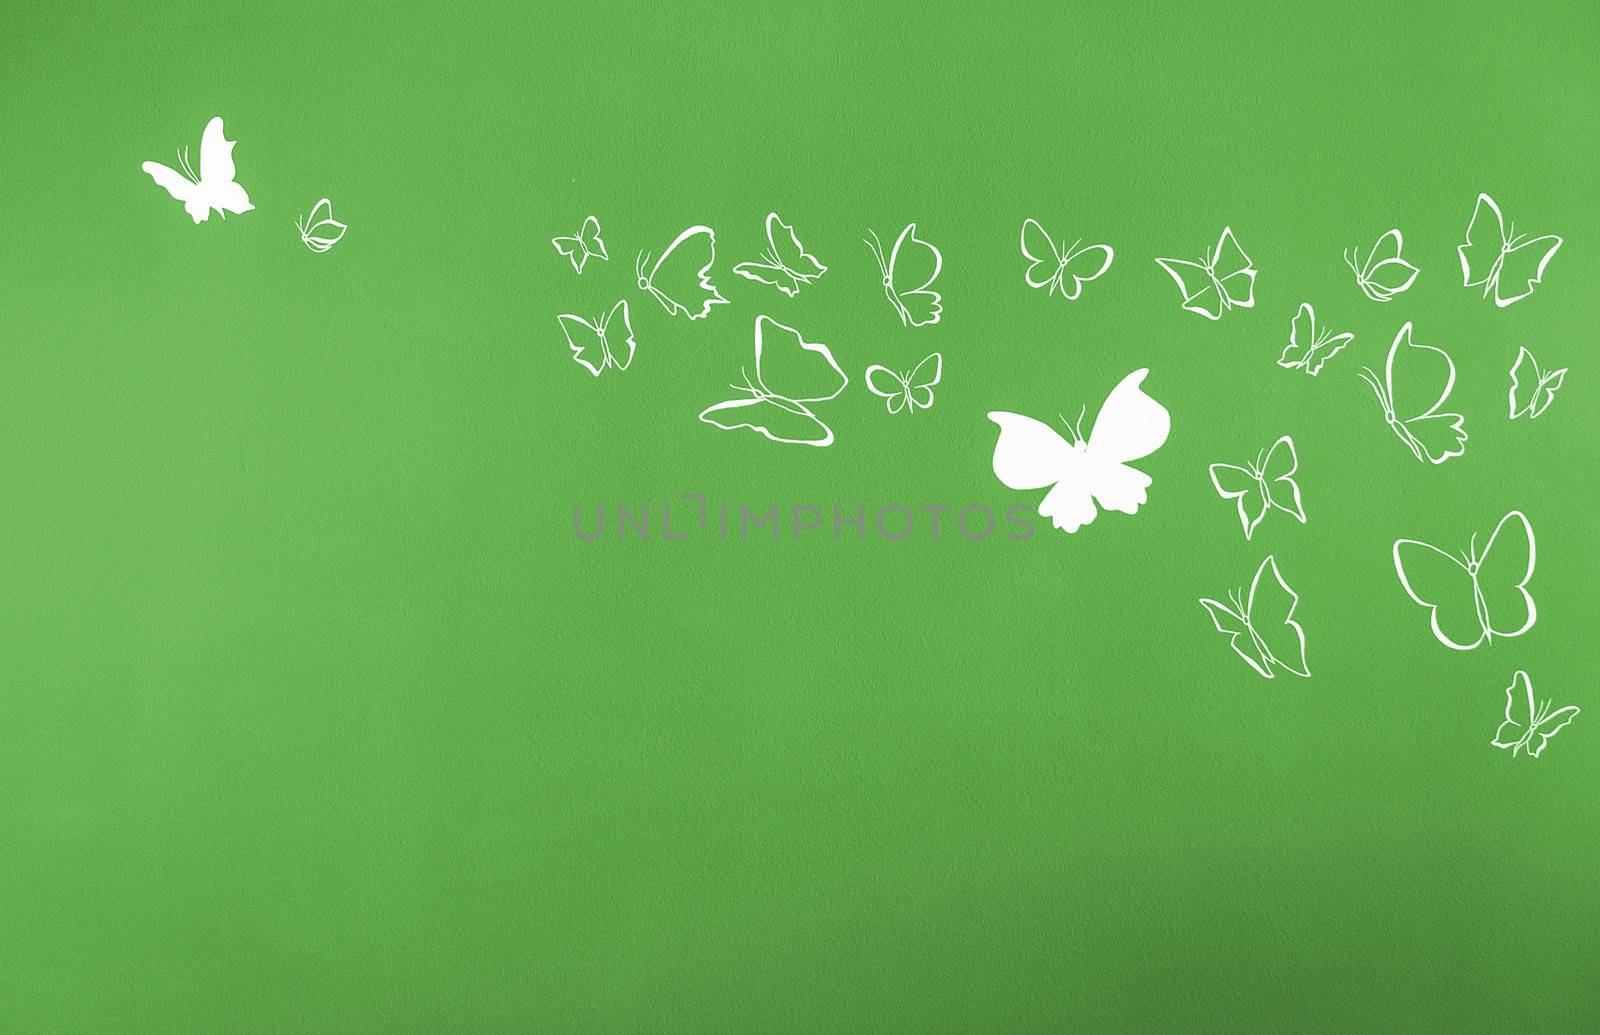 Group of white silhouettes butterflies flying over a green background